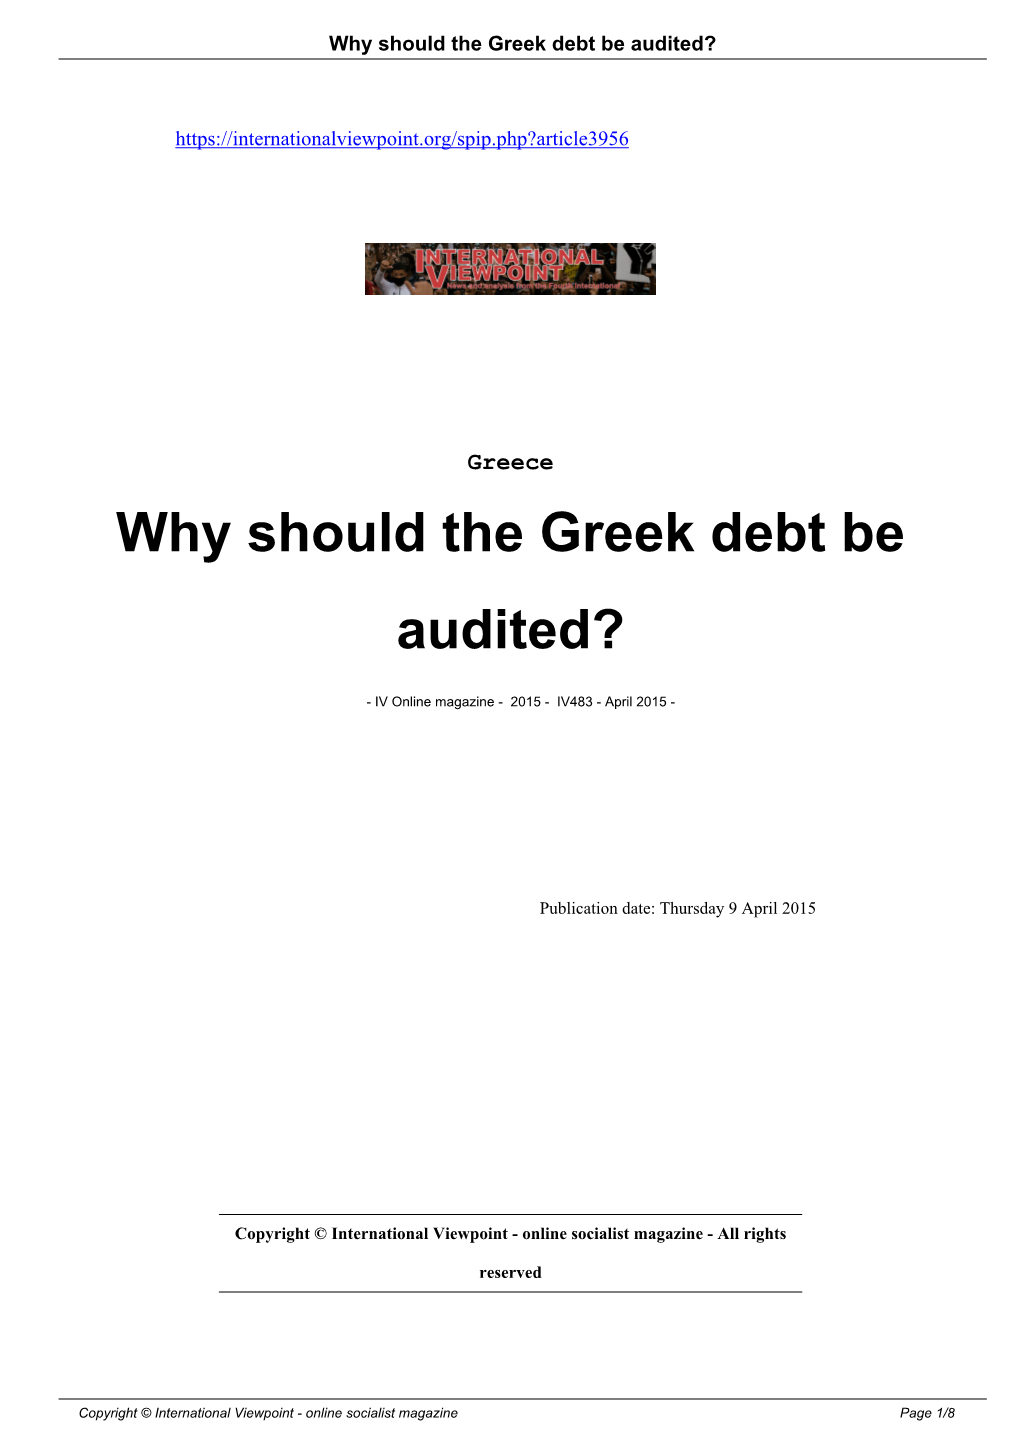 Why Should the Greek Debt Be Audited?